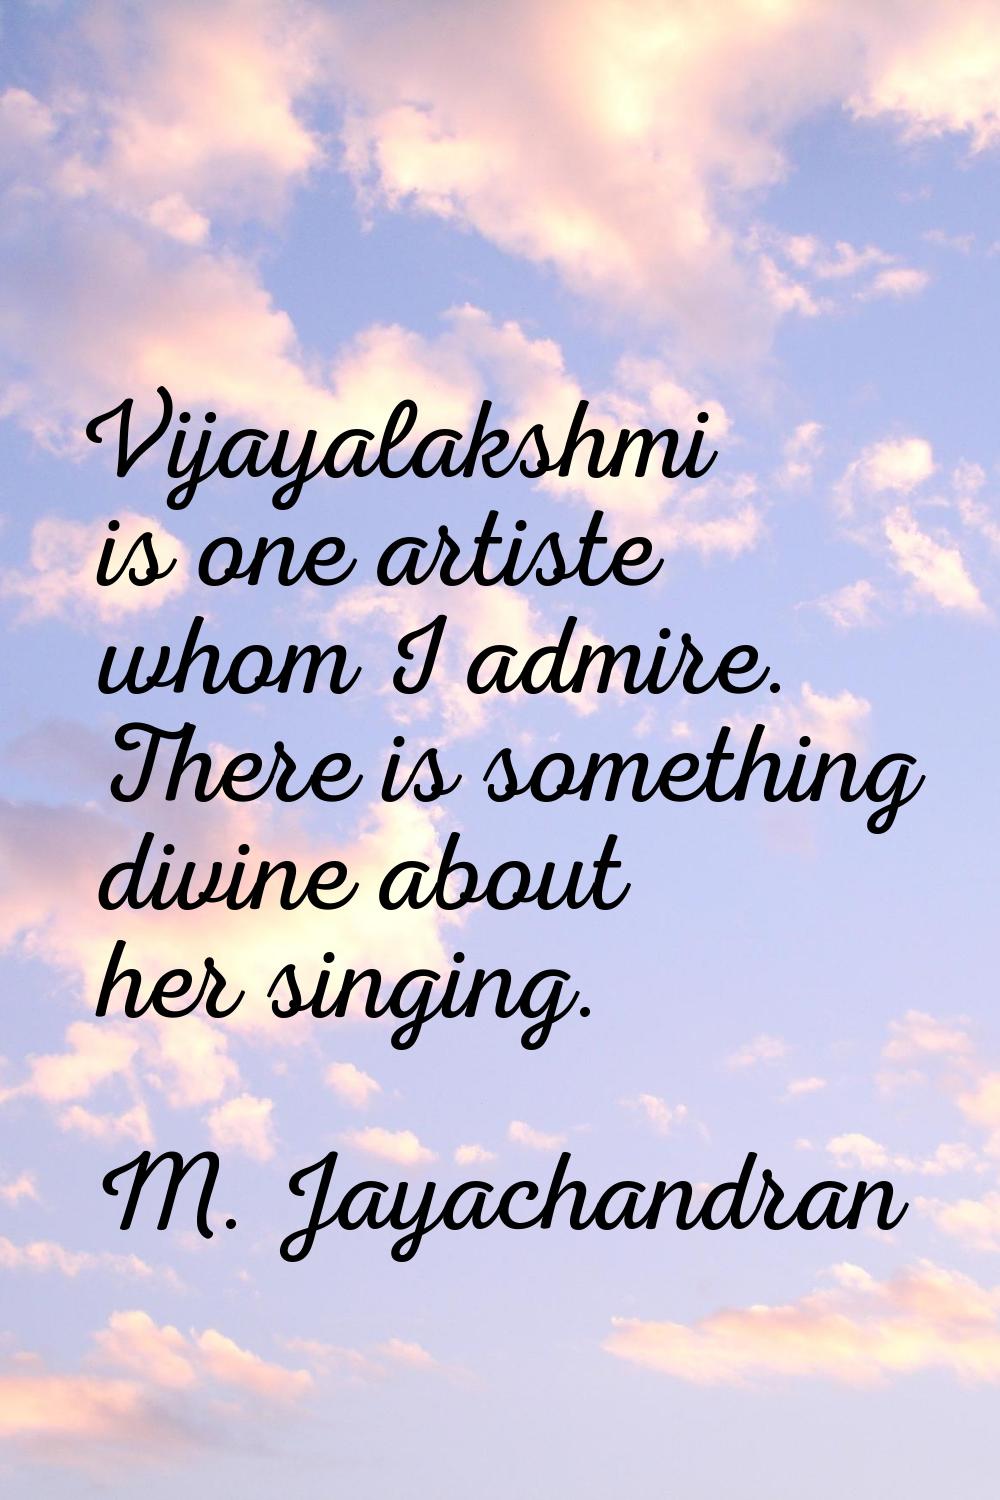 Vijayalakshmi is one artiste whom I admire. There is something divine about her singing.